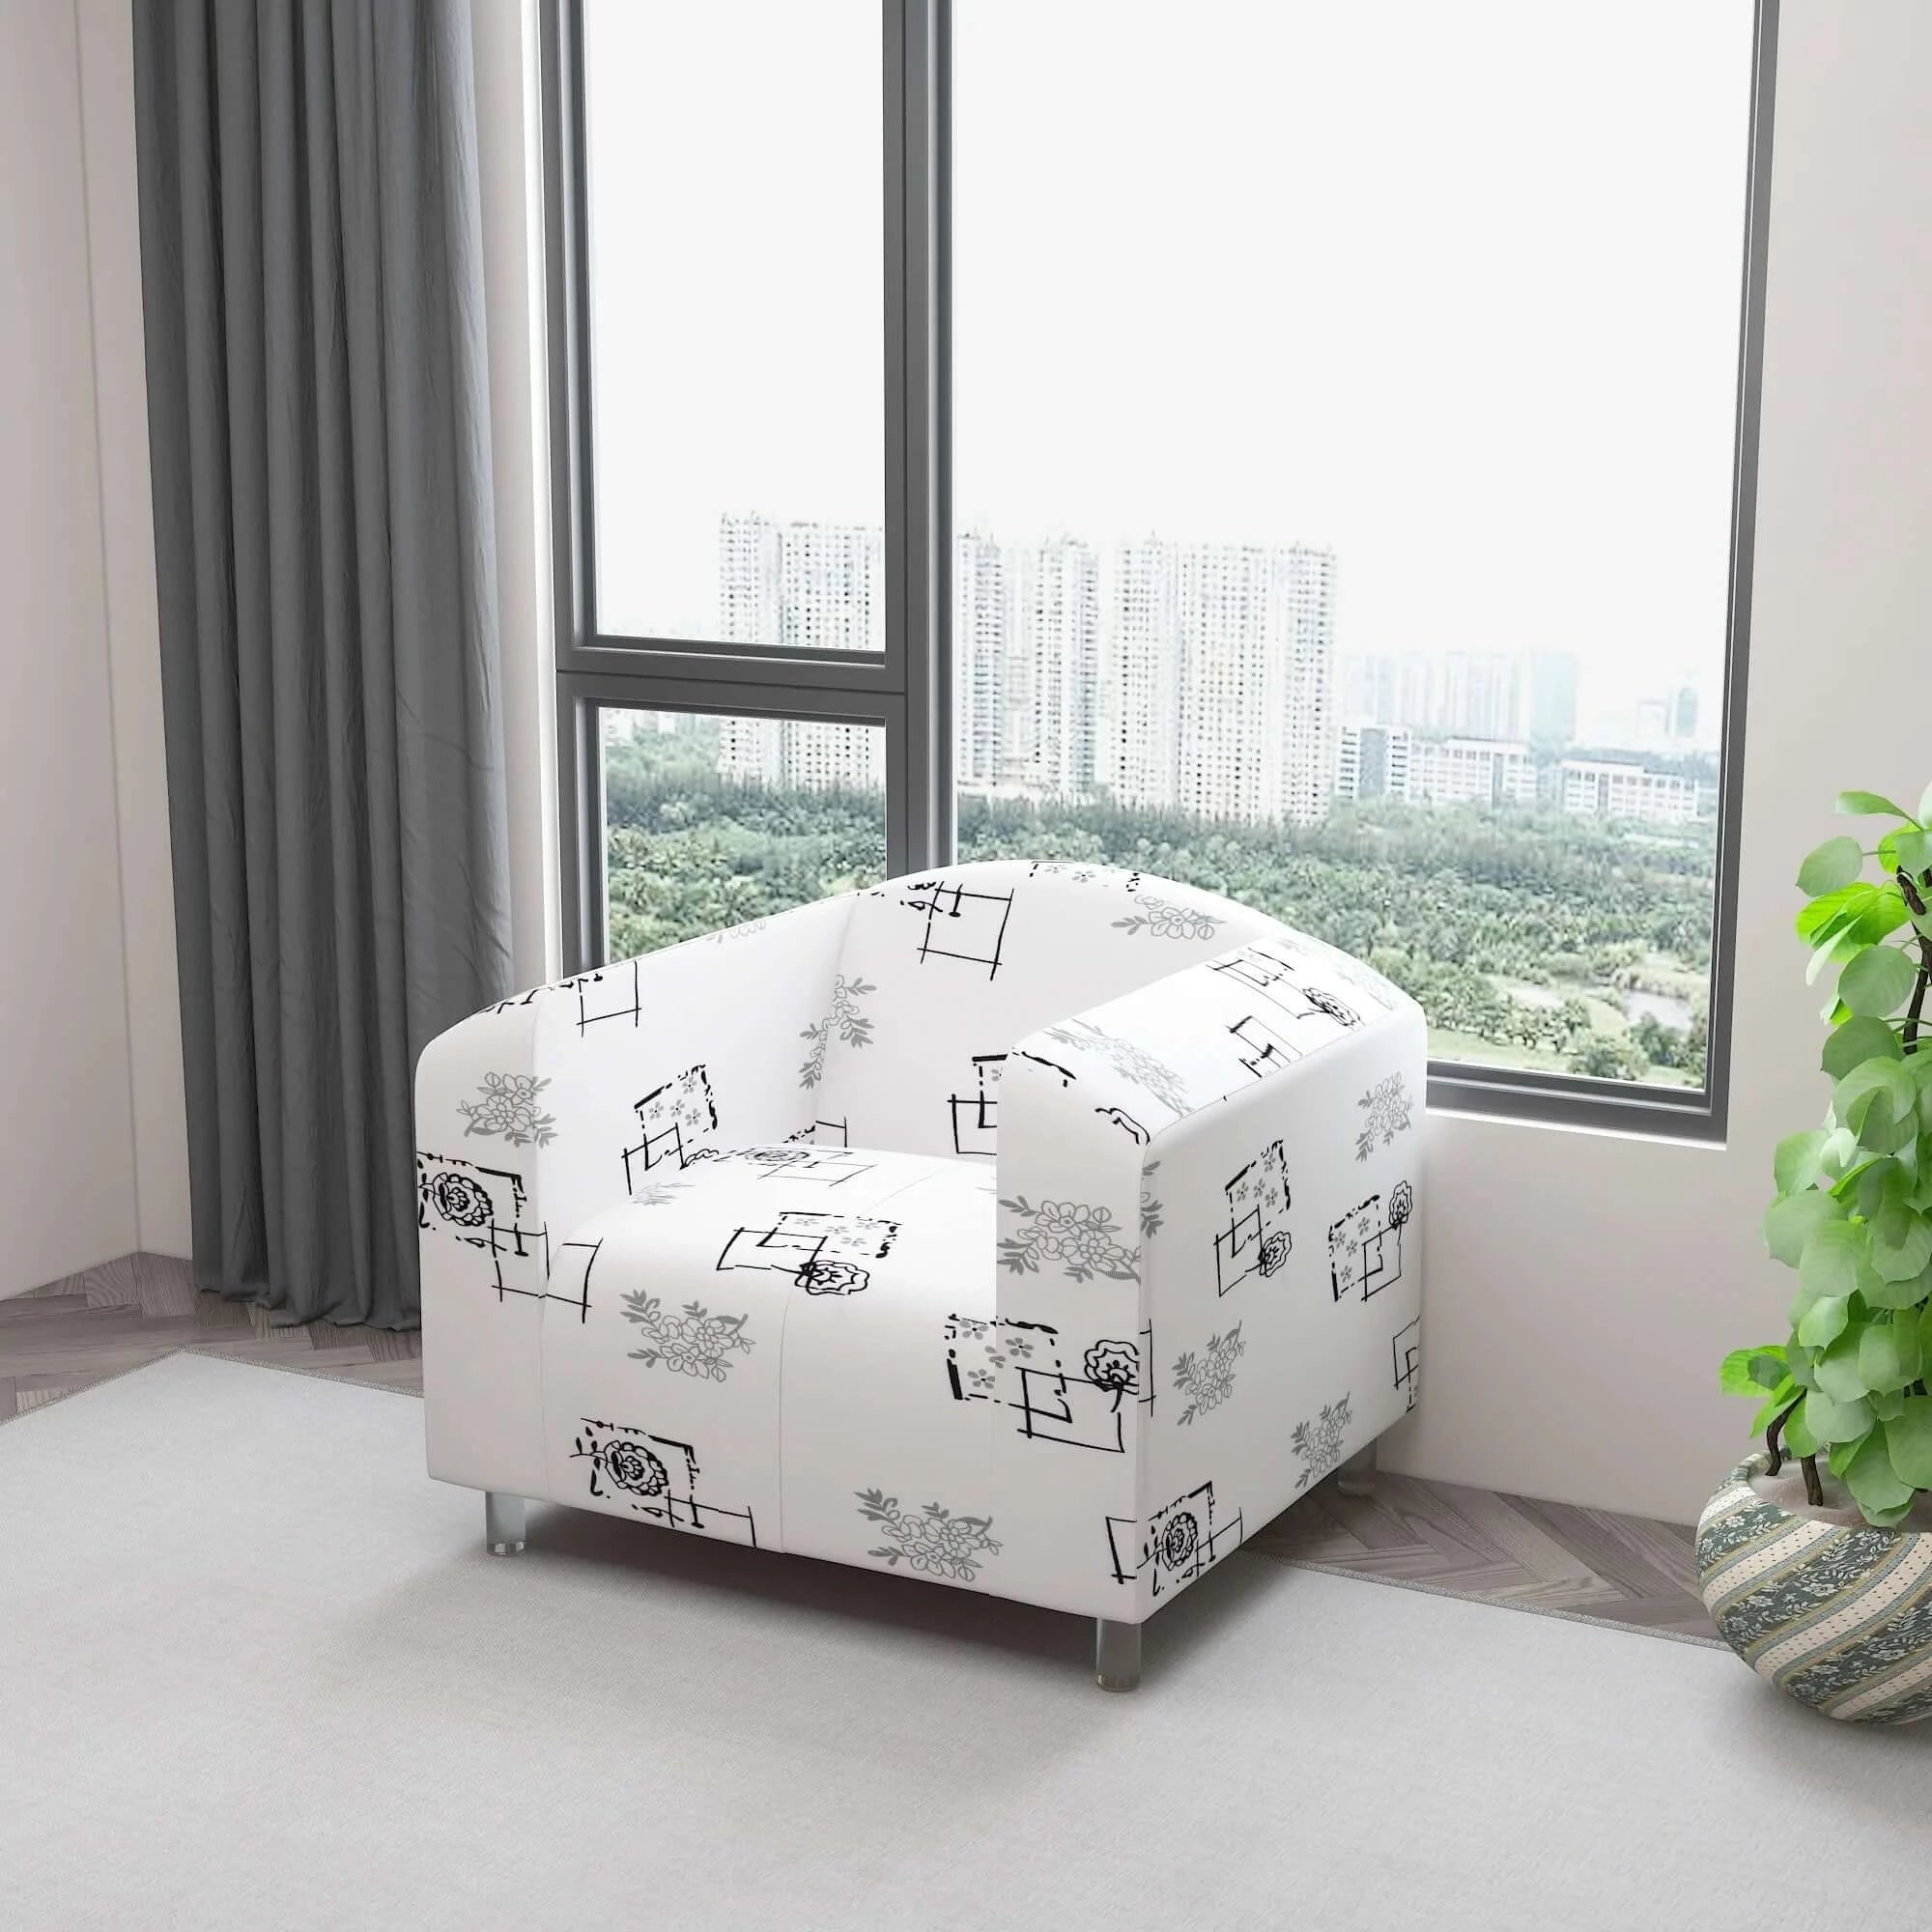 Marigold Printed Sofa Protector Cover Full Stretchable, MG17 - Dream Care Furnishings Private Limited